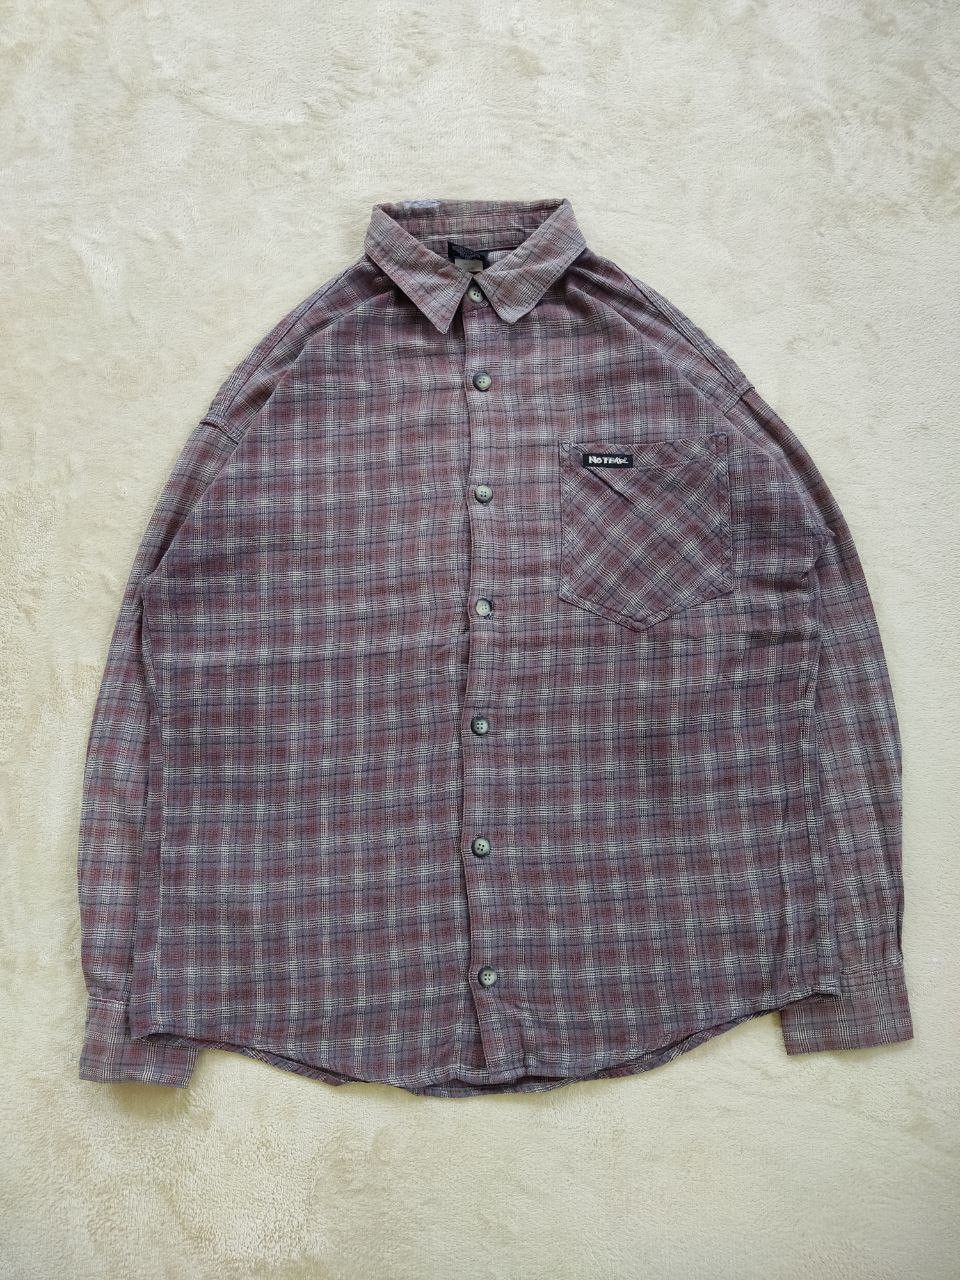 Vintage 90s No Fear Made in USA Old Skool Plaid Shirt - 2